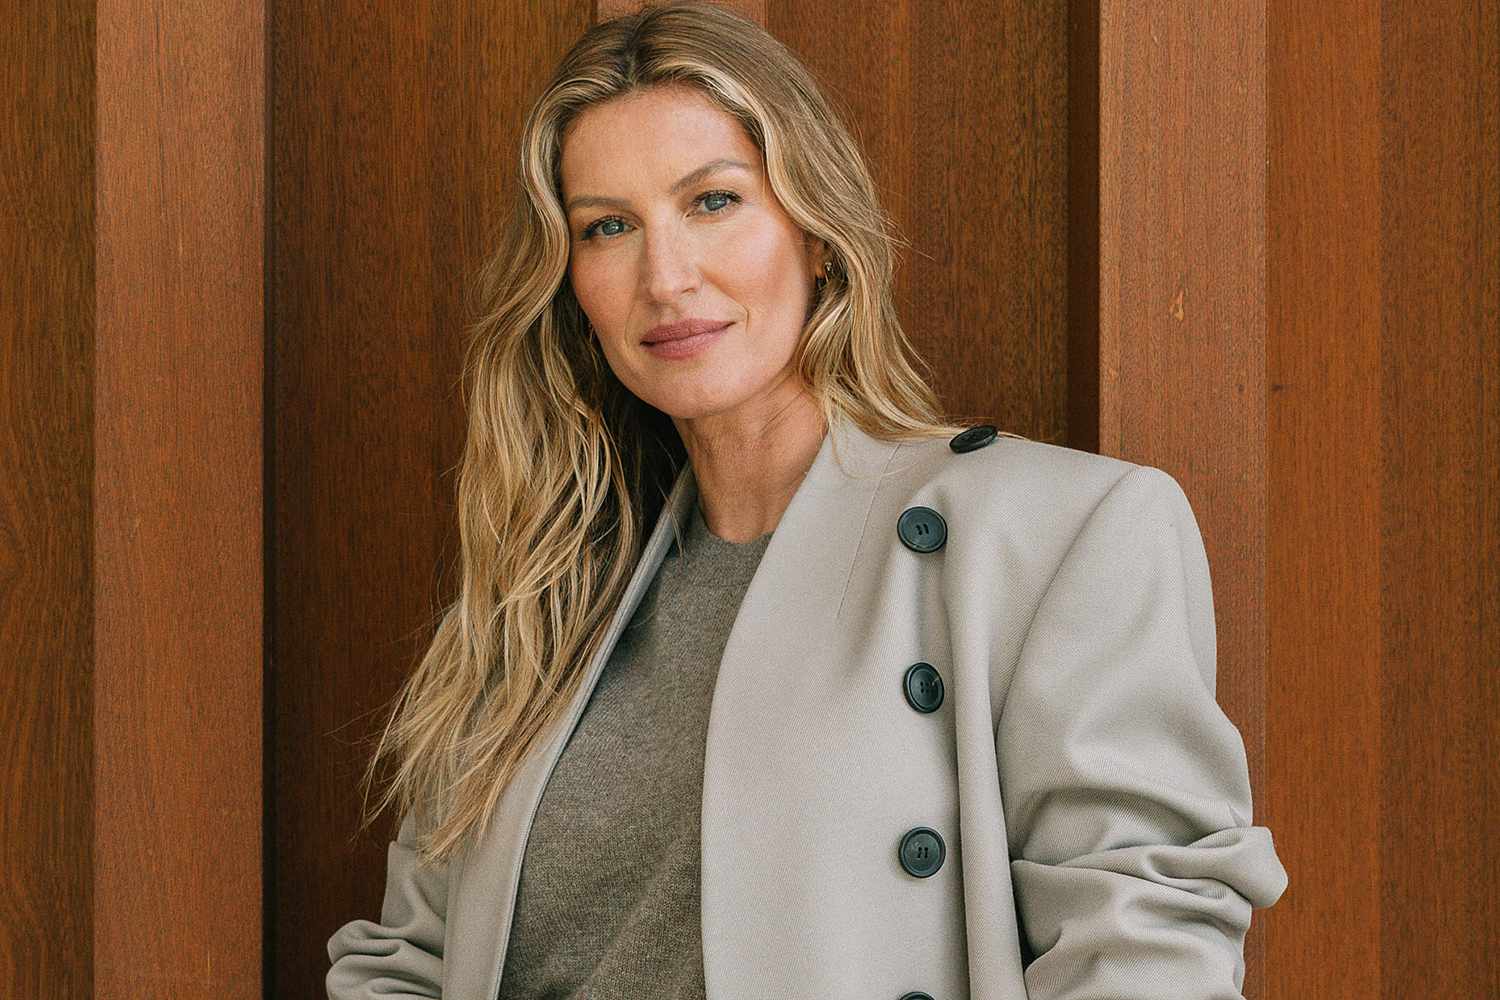 Gisele Bündchen Reveals the Real Way to Pronounce Her Name in Resurfaced Clip (You've Been Saying It Wrong)